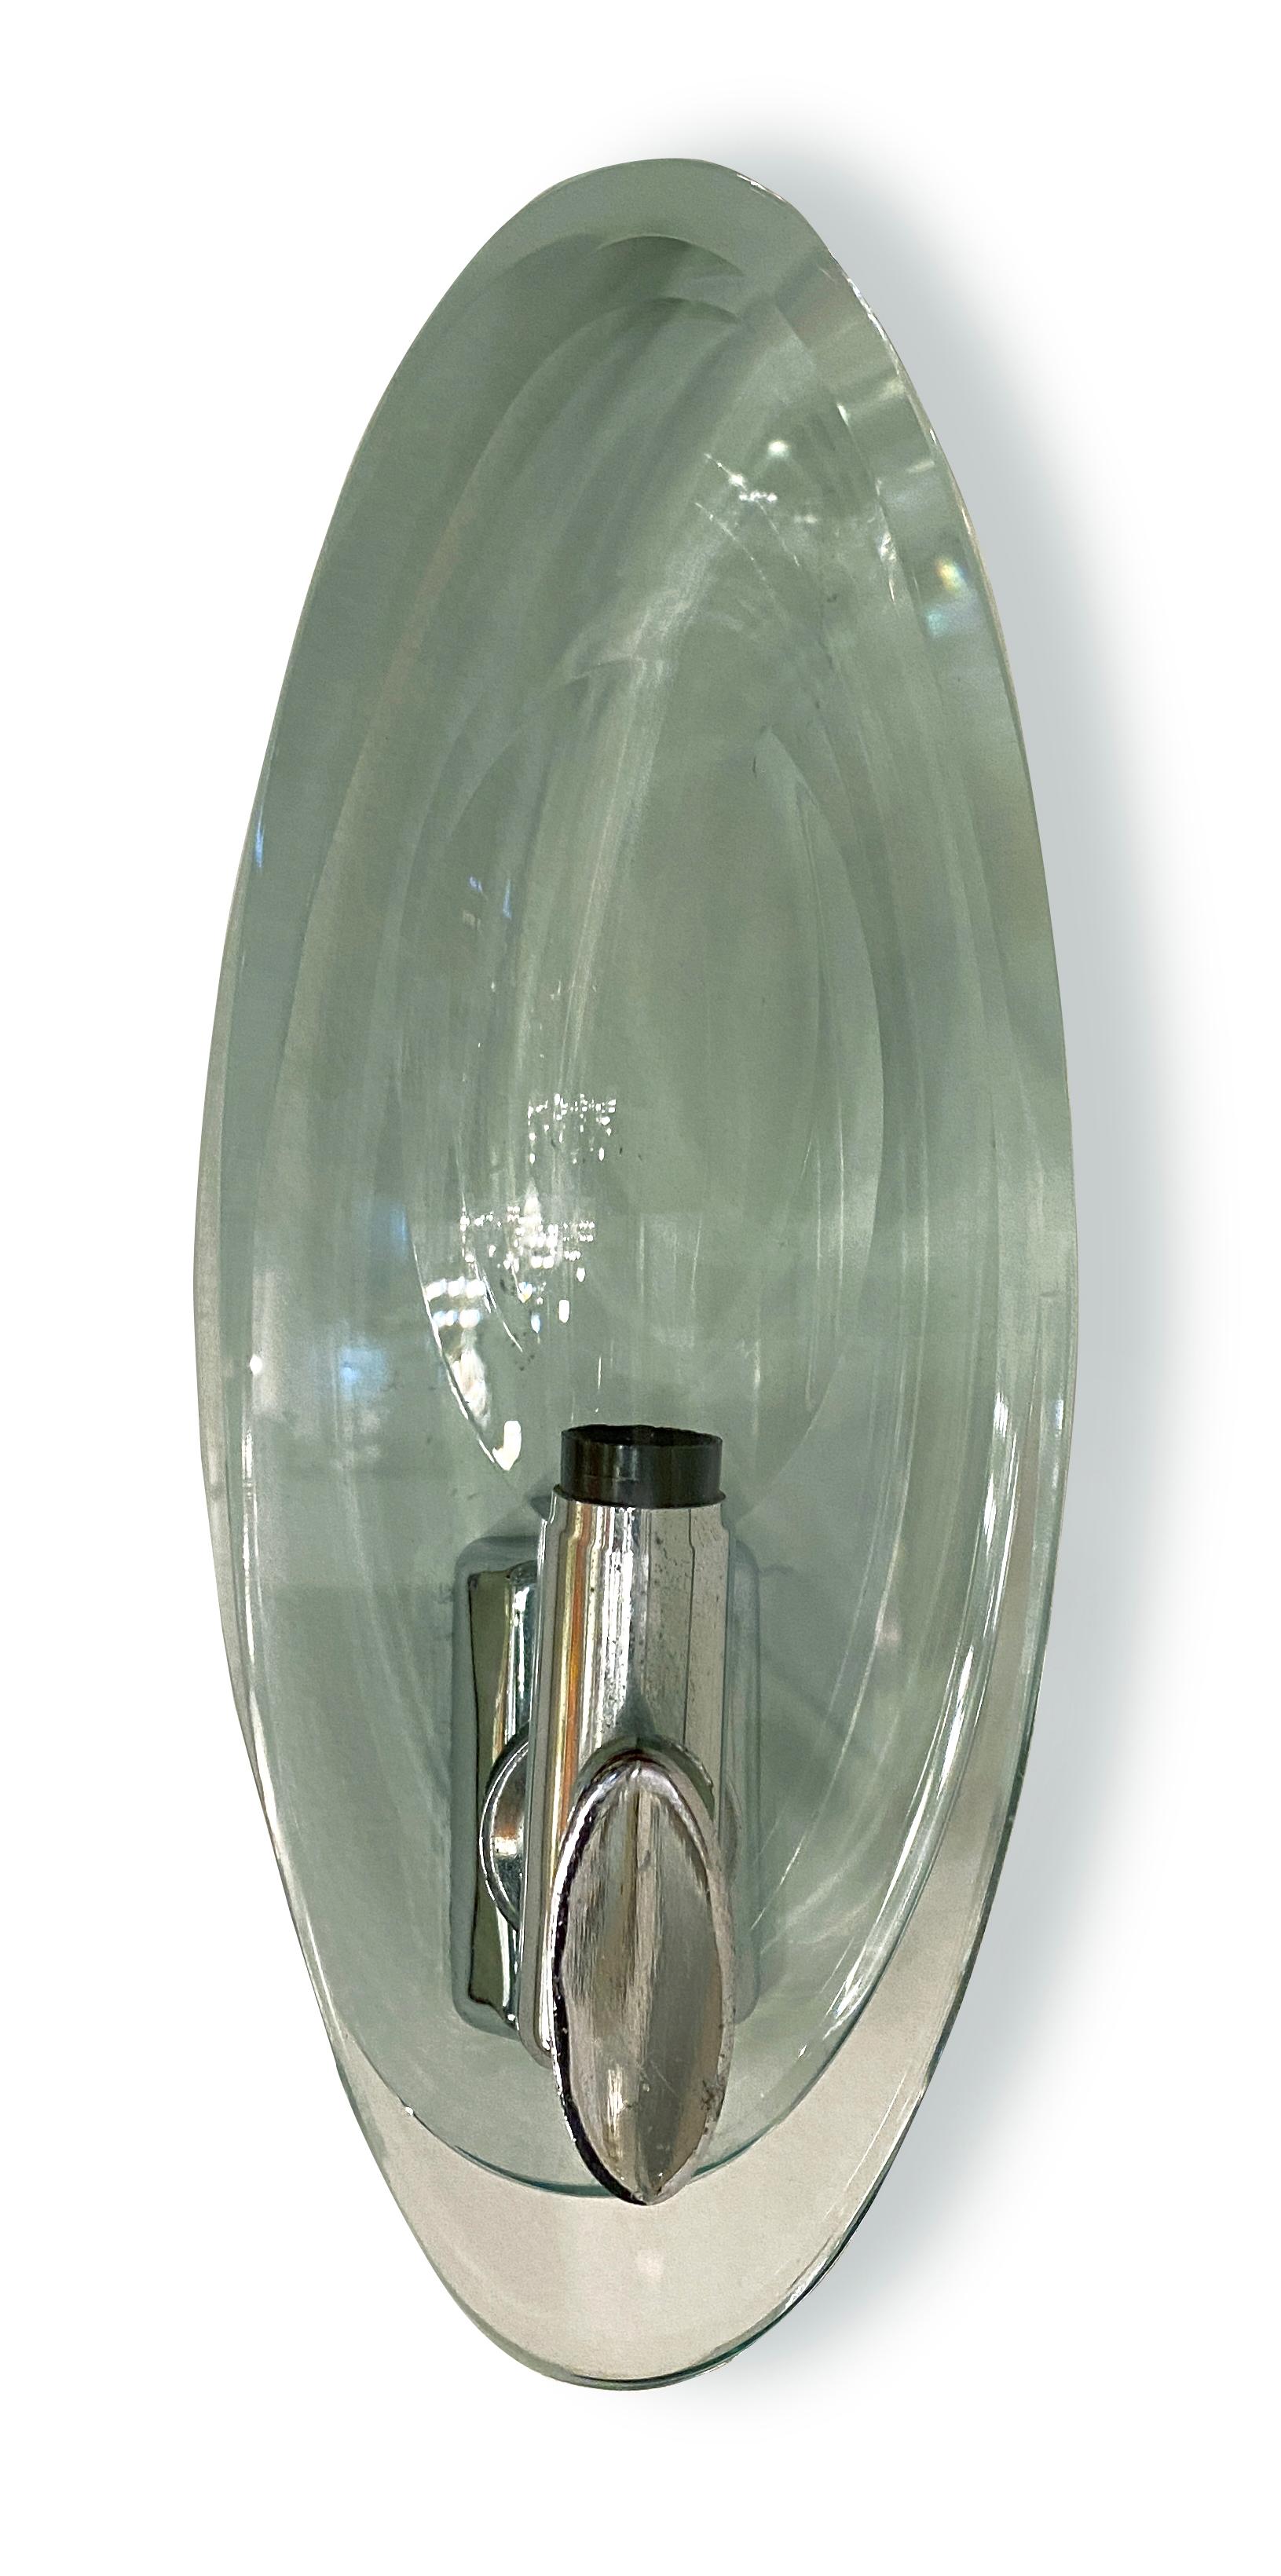 Thick green glass with beveled edges with a polished nickel light source